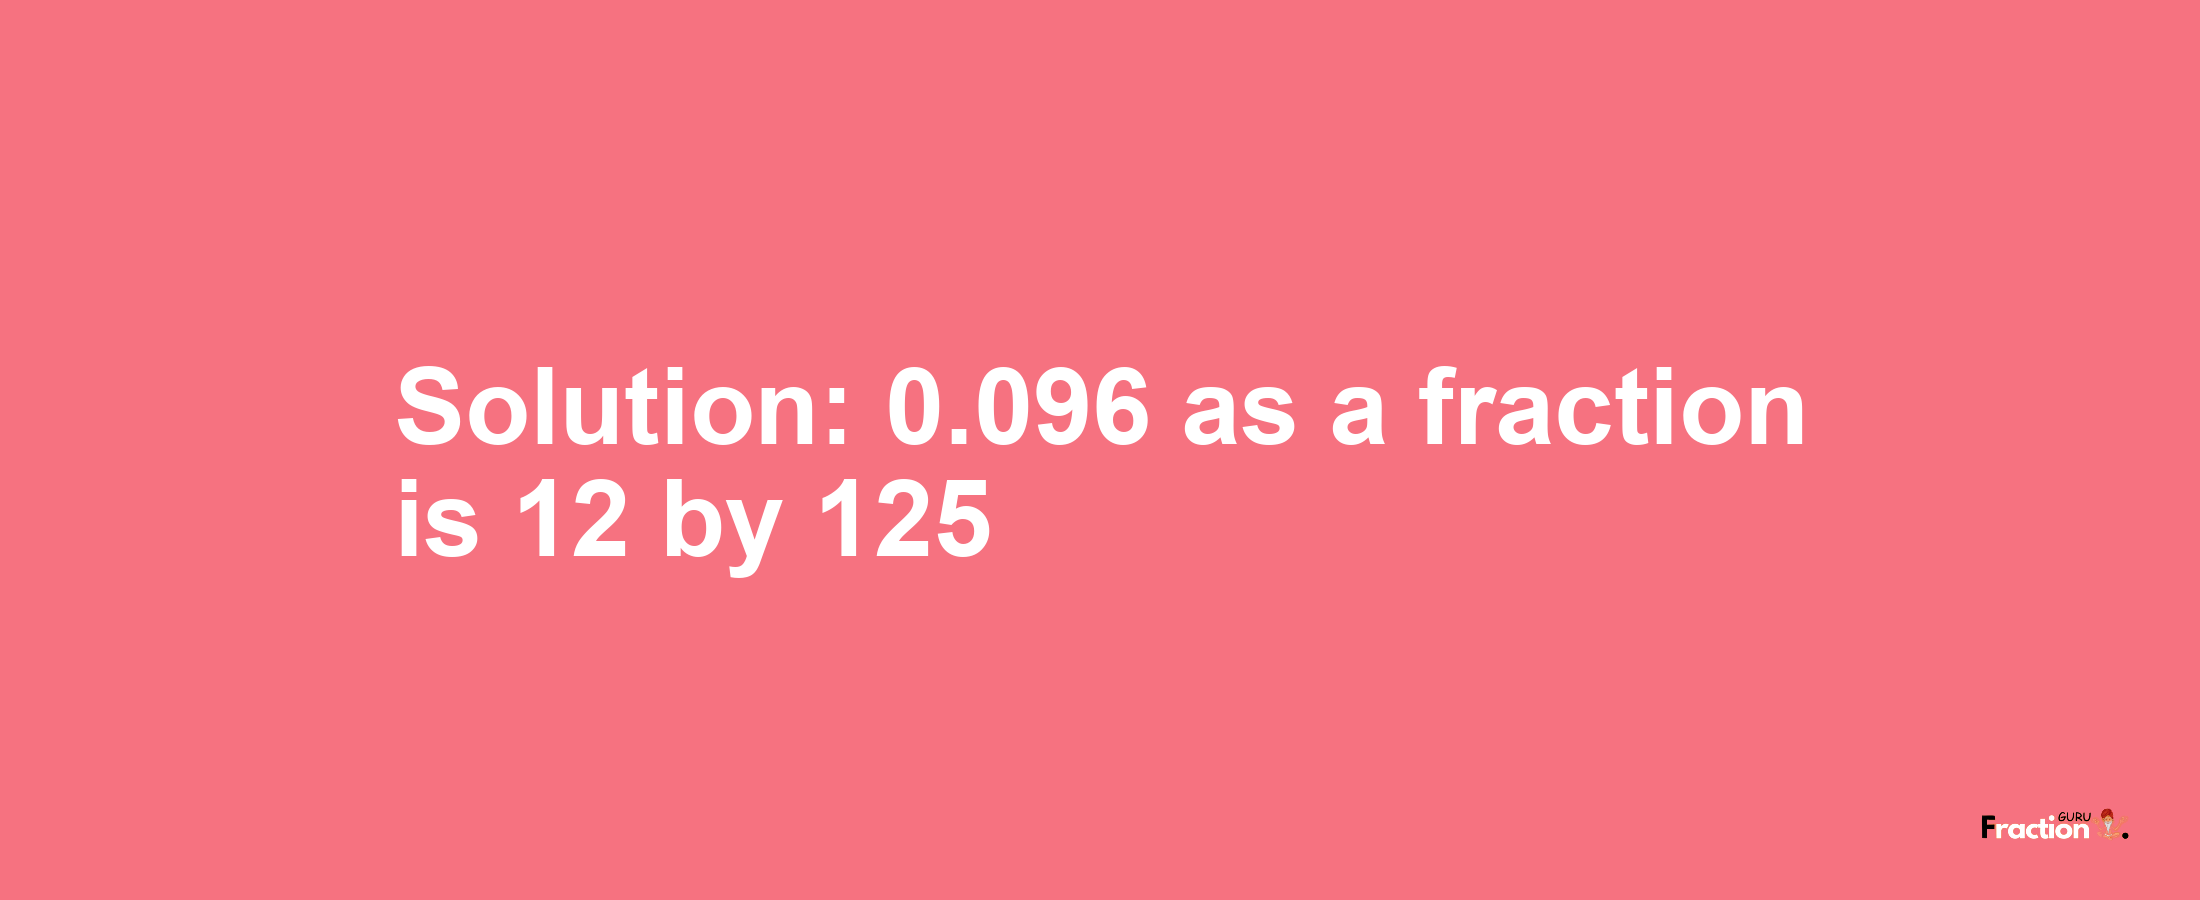 Solution:0.096 as a fraction is 12/125